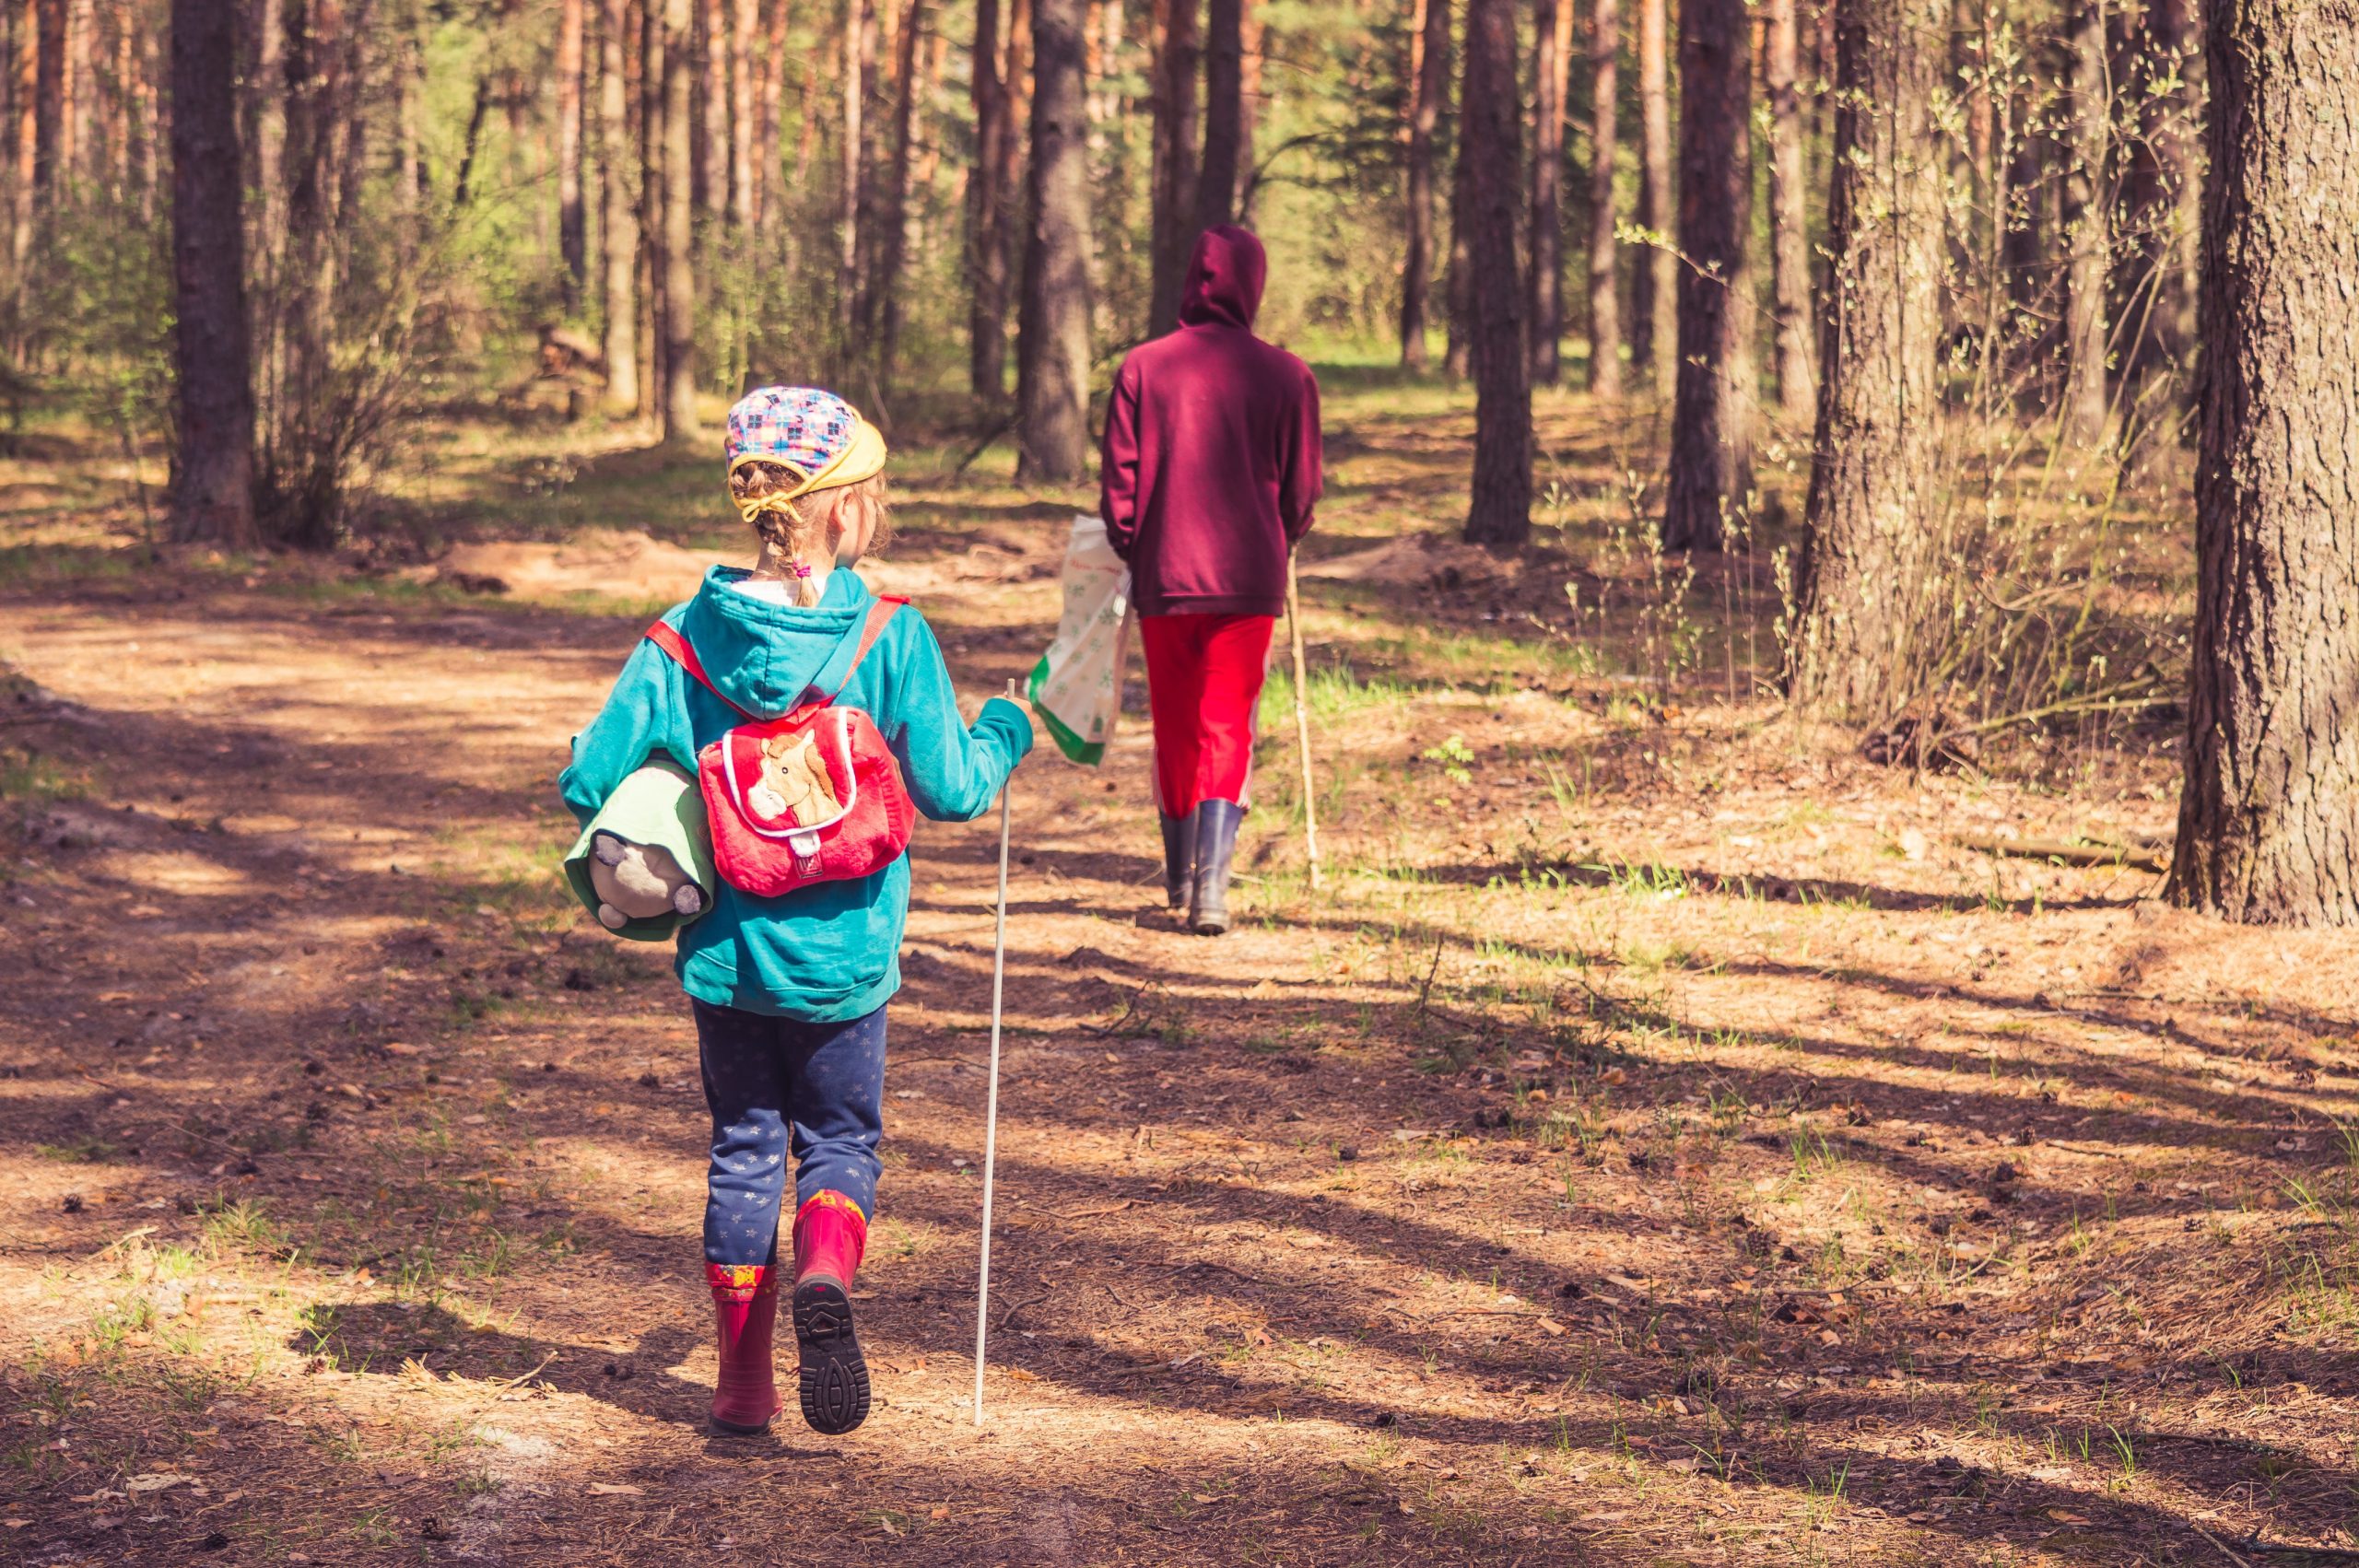 A daughter and her mother hike a wooded trail together